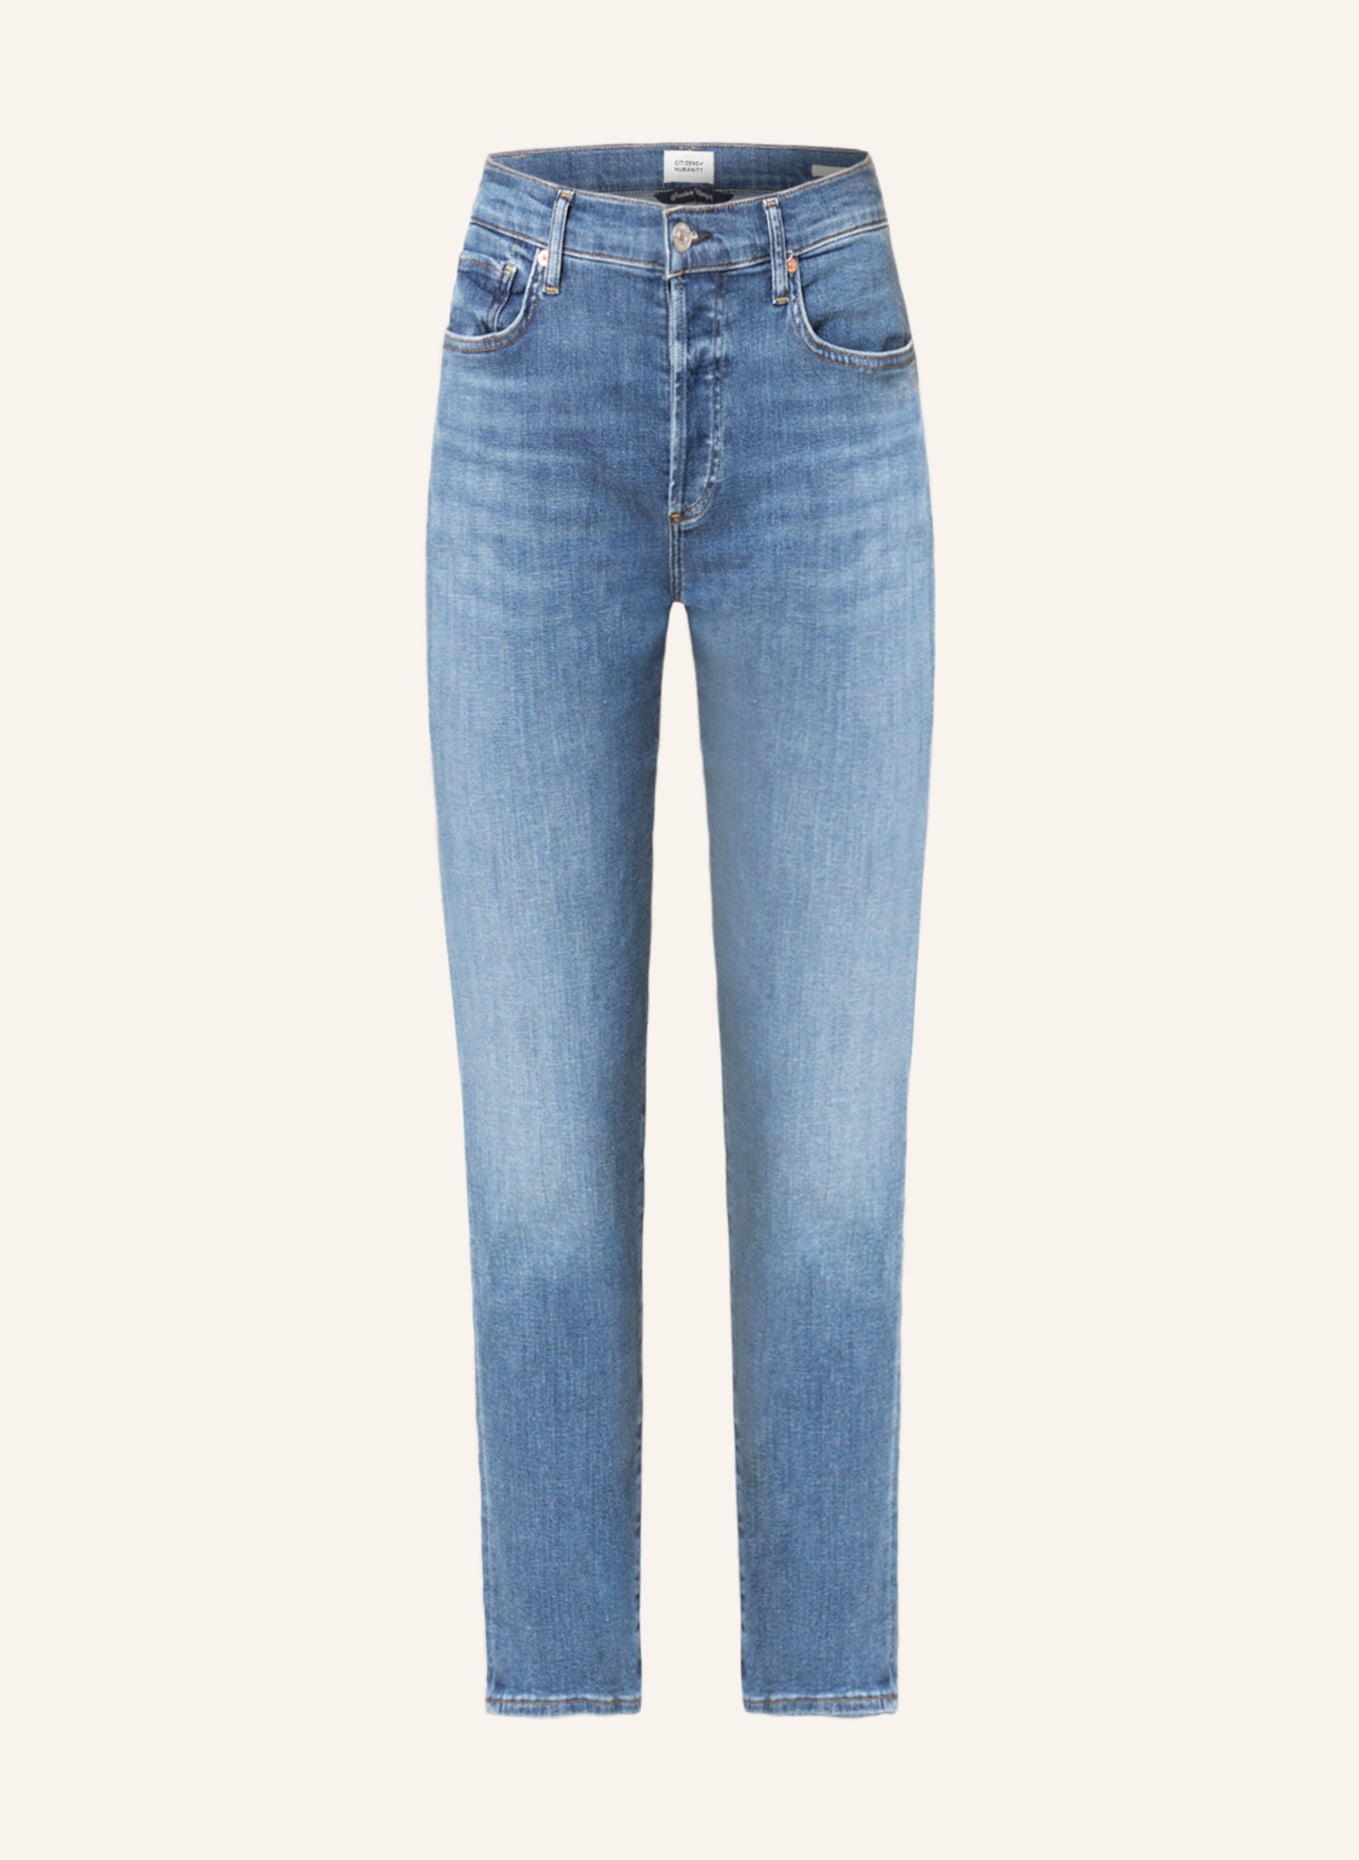 CITIZENS of HUMANITY Boyfriend jeans EMERSON, Color: Lawless md vint indigo (Image 1)